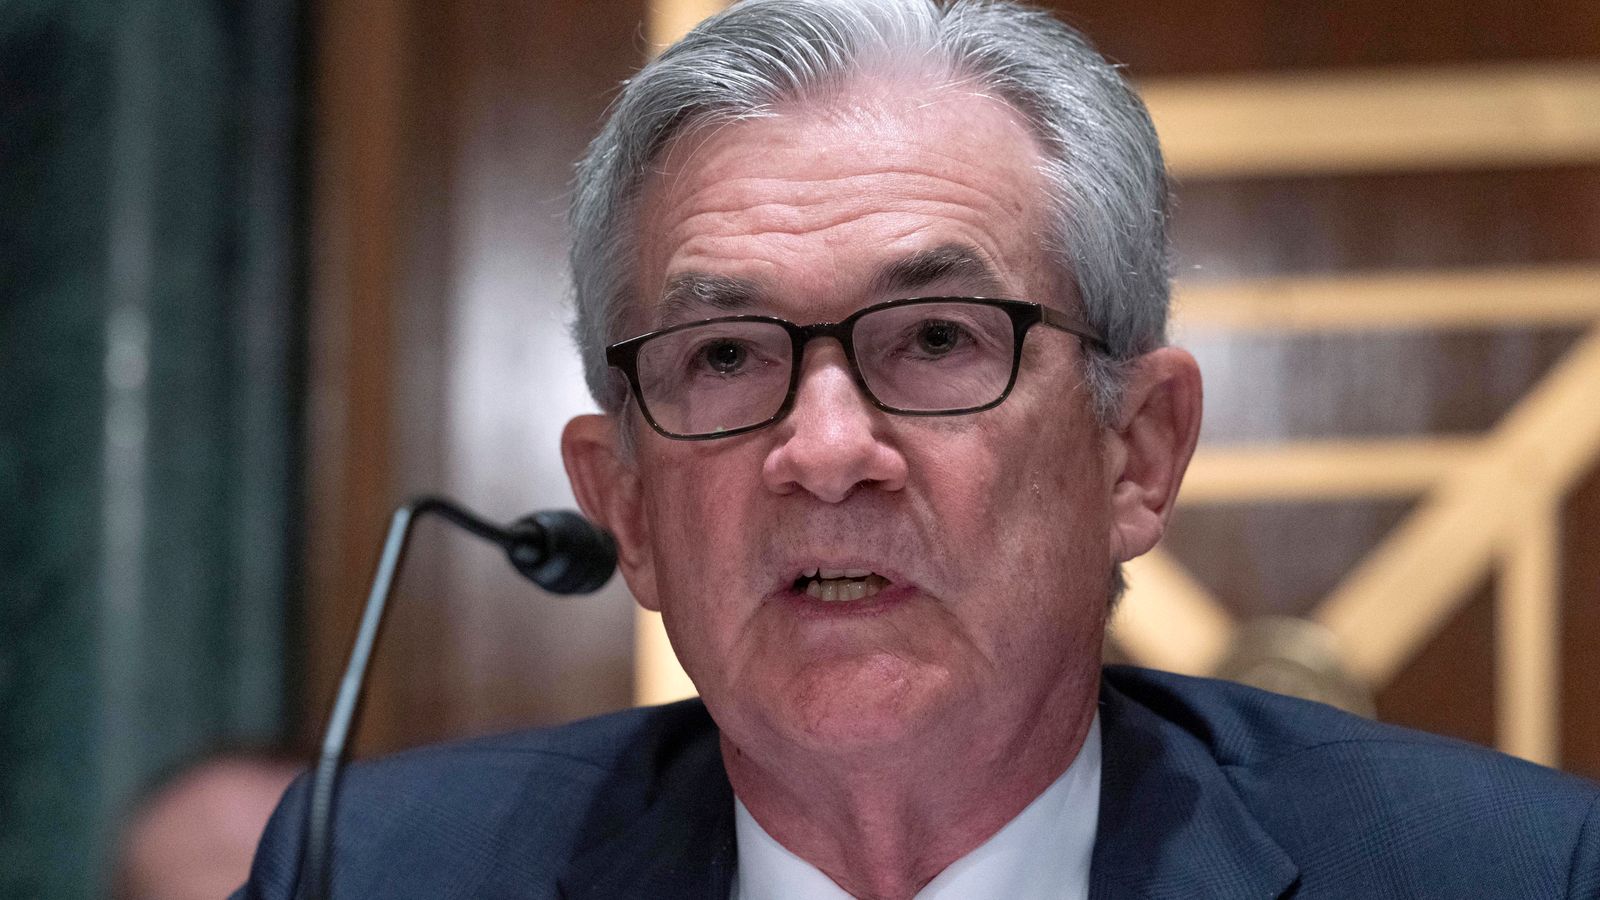 Jerome Powell secures nod for second term as chair of US Federal Reserve